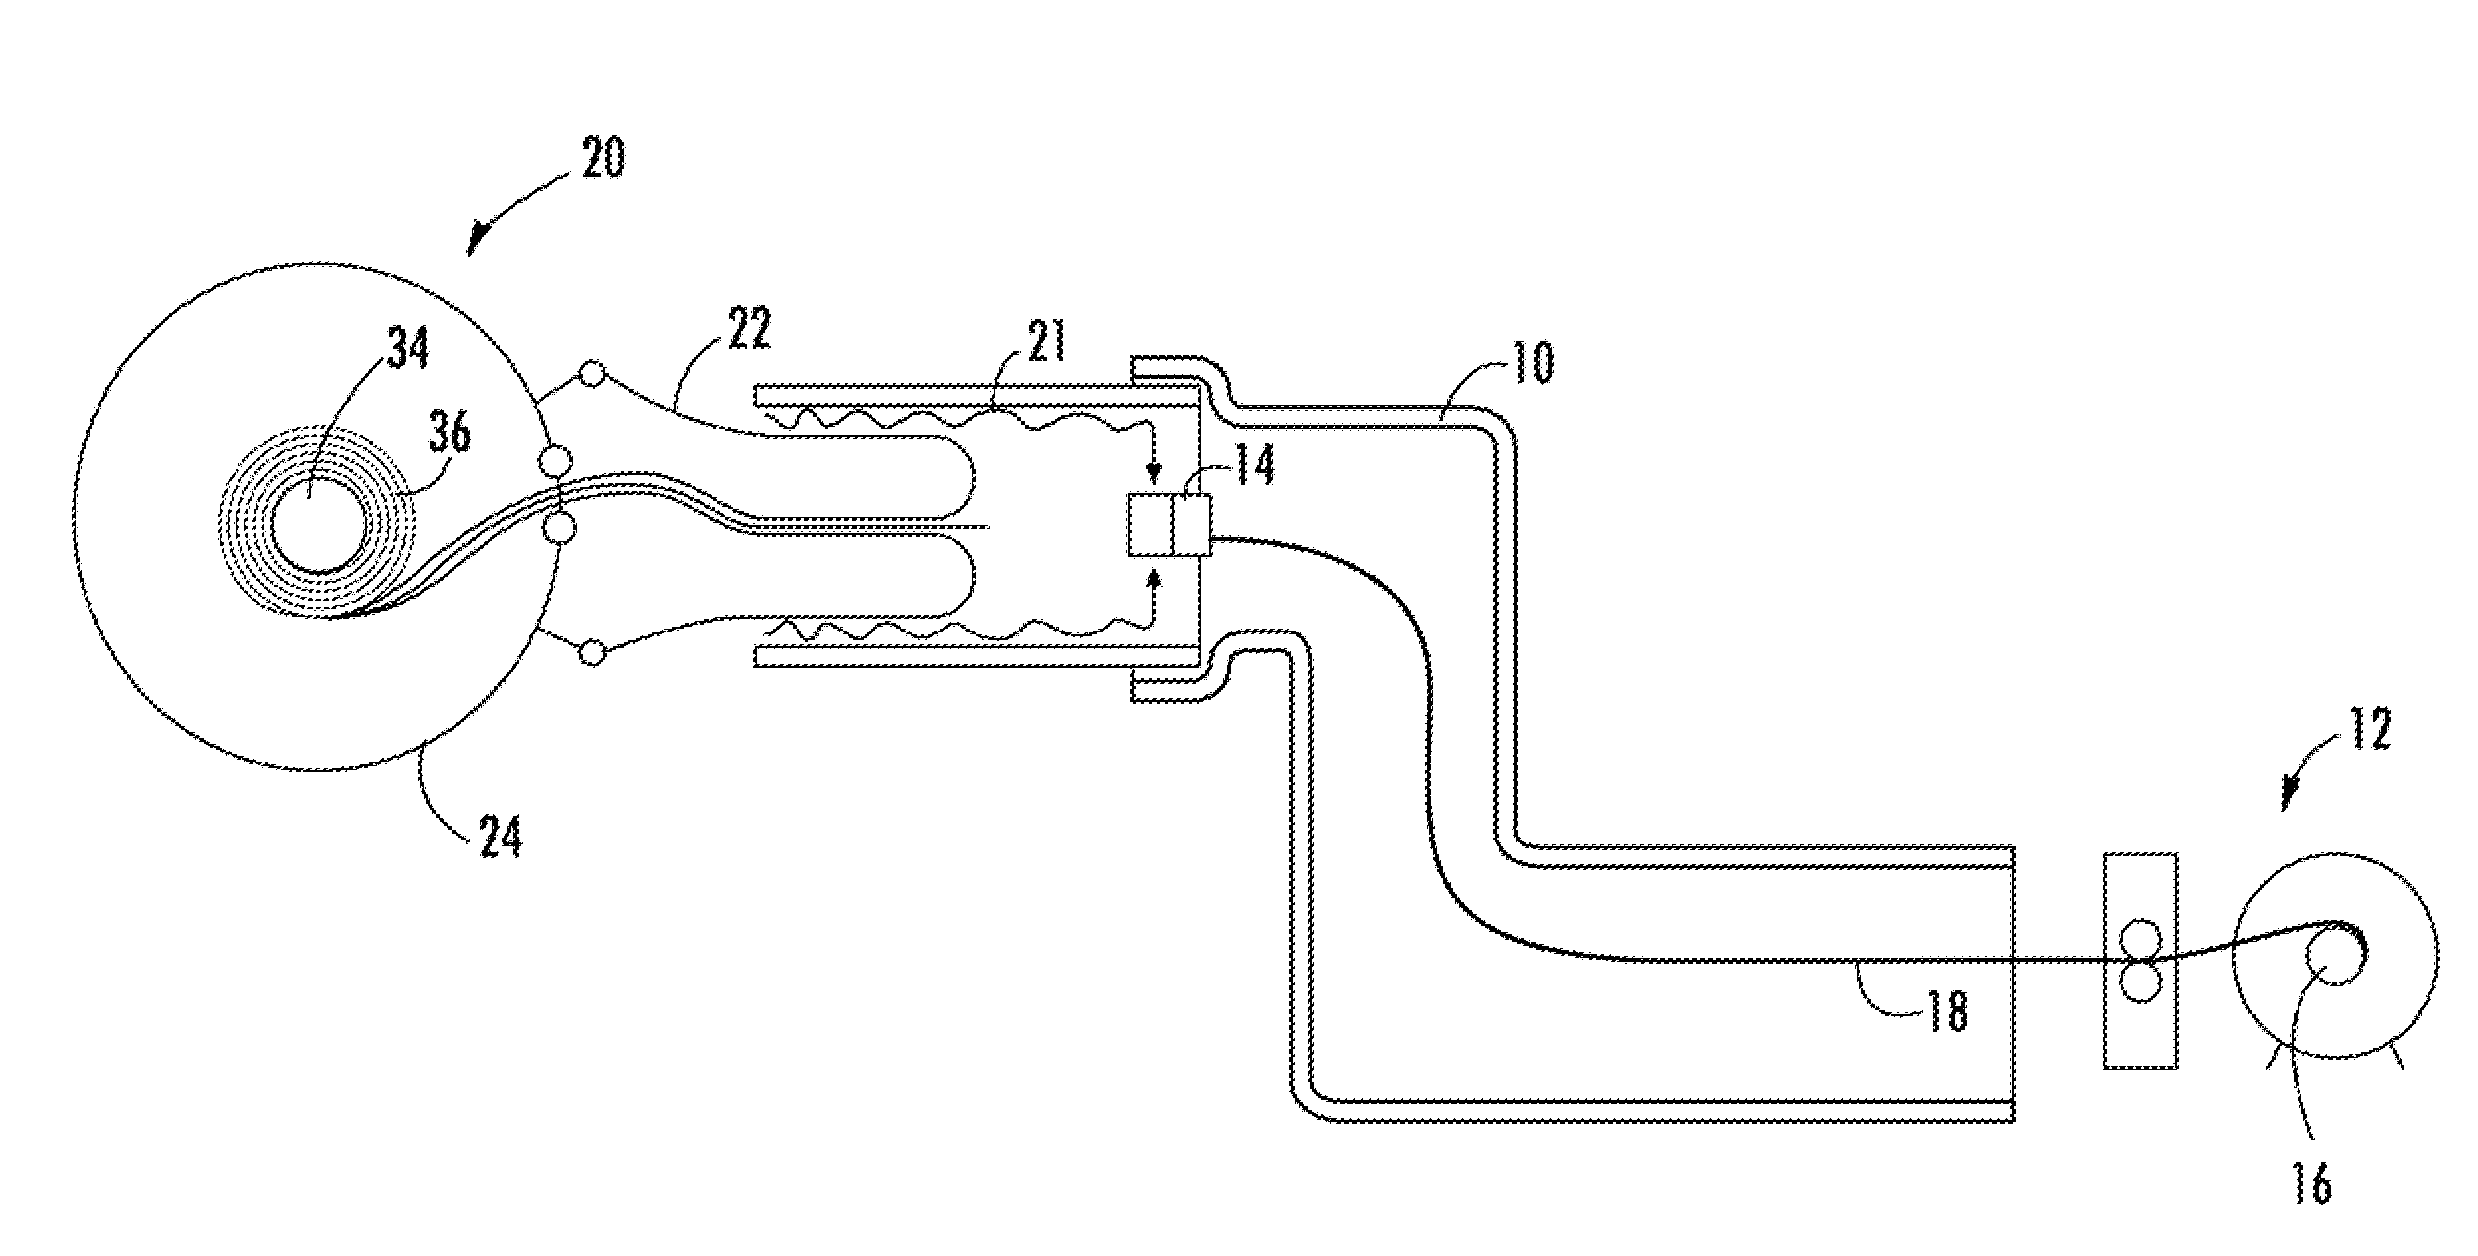 Pressure infusion lining system